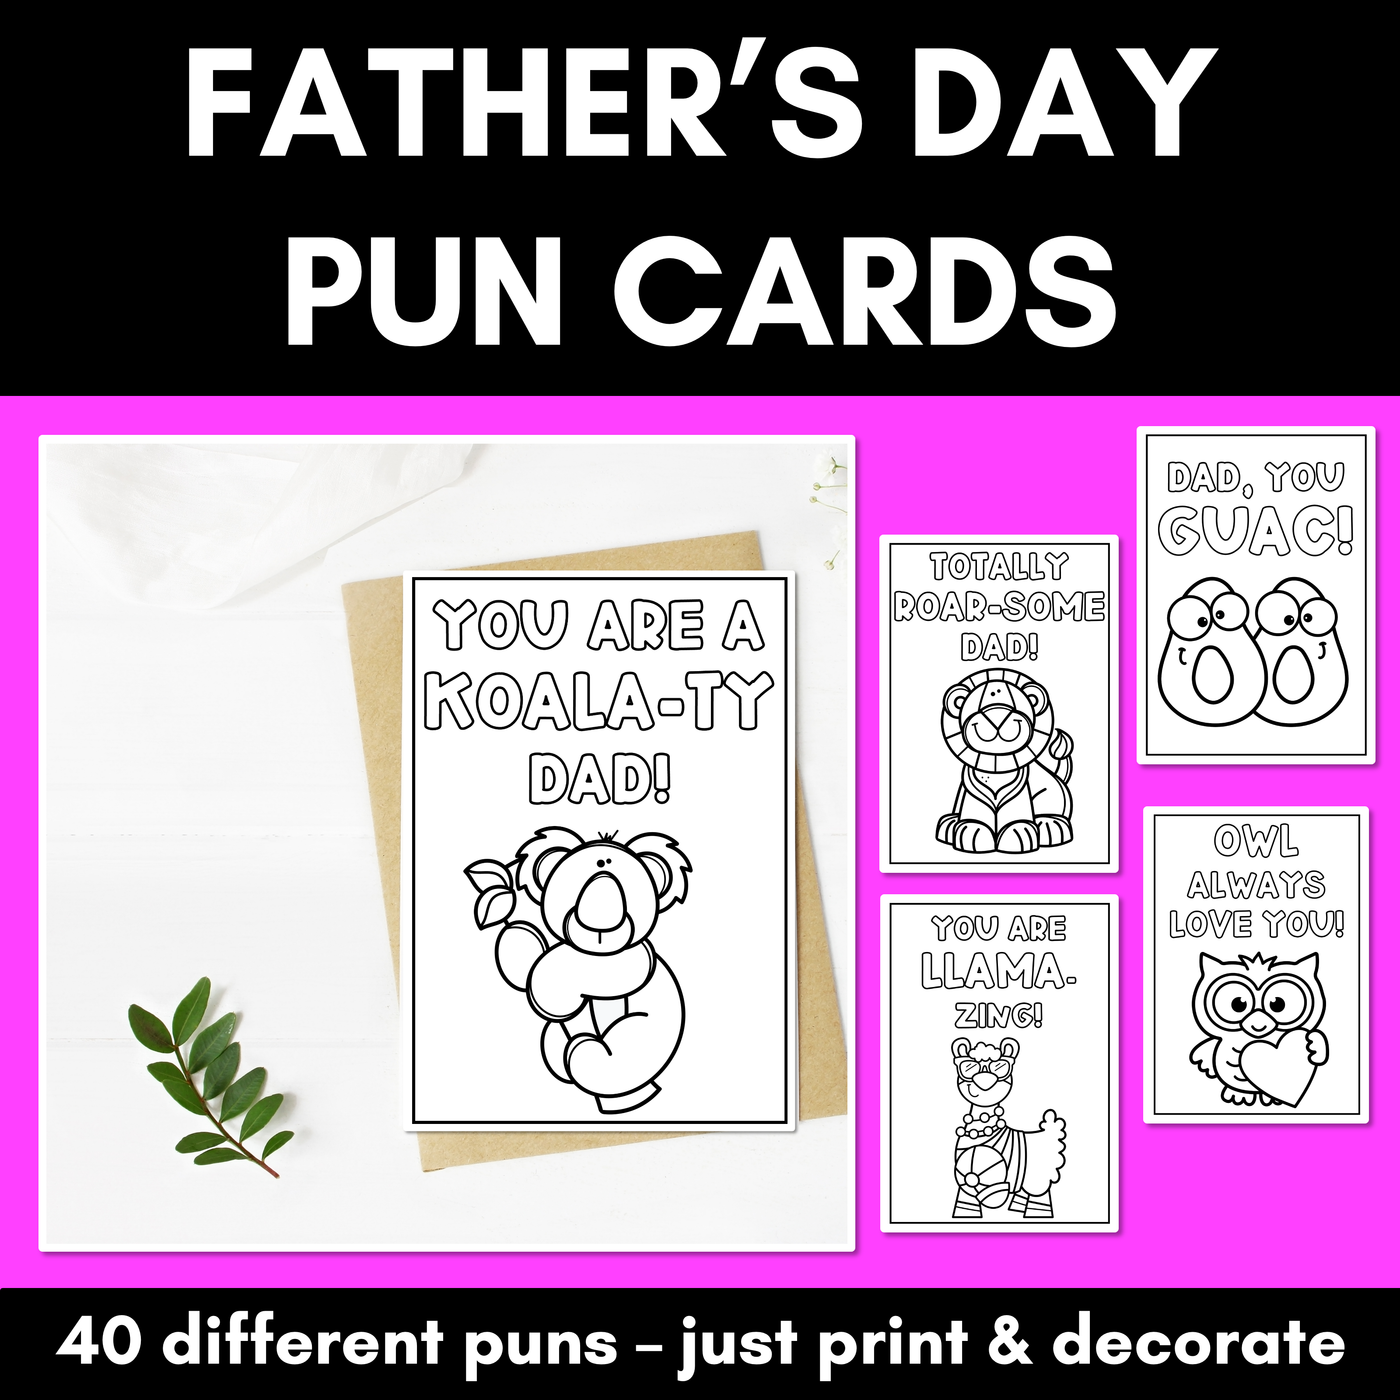 Father's Day Pun Cards